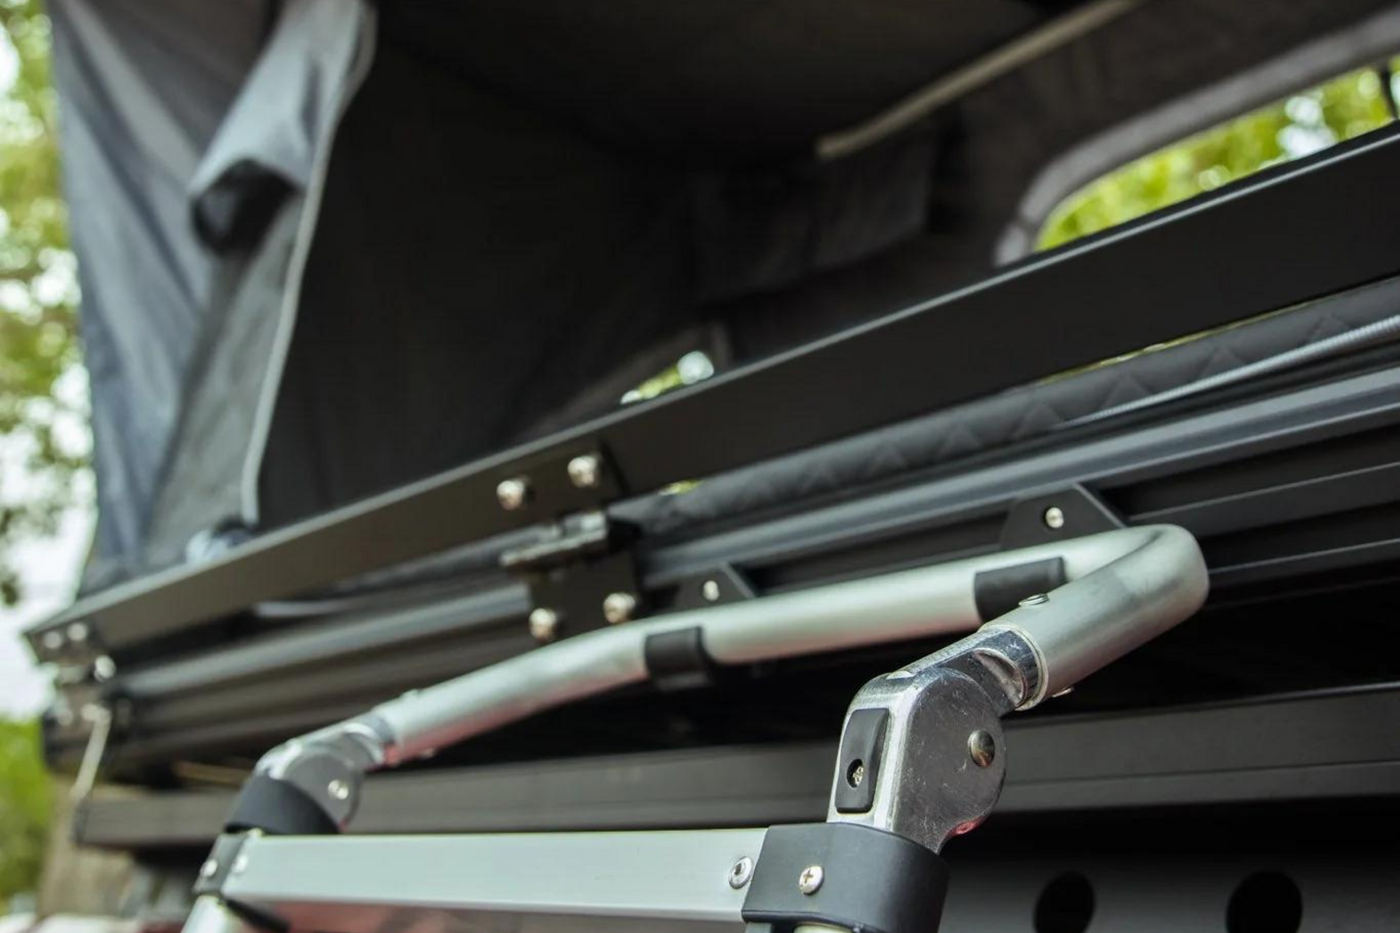 Ladder Mounts for the Odyssey and Evolution Series Rooftop Tents